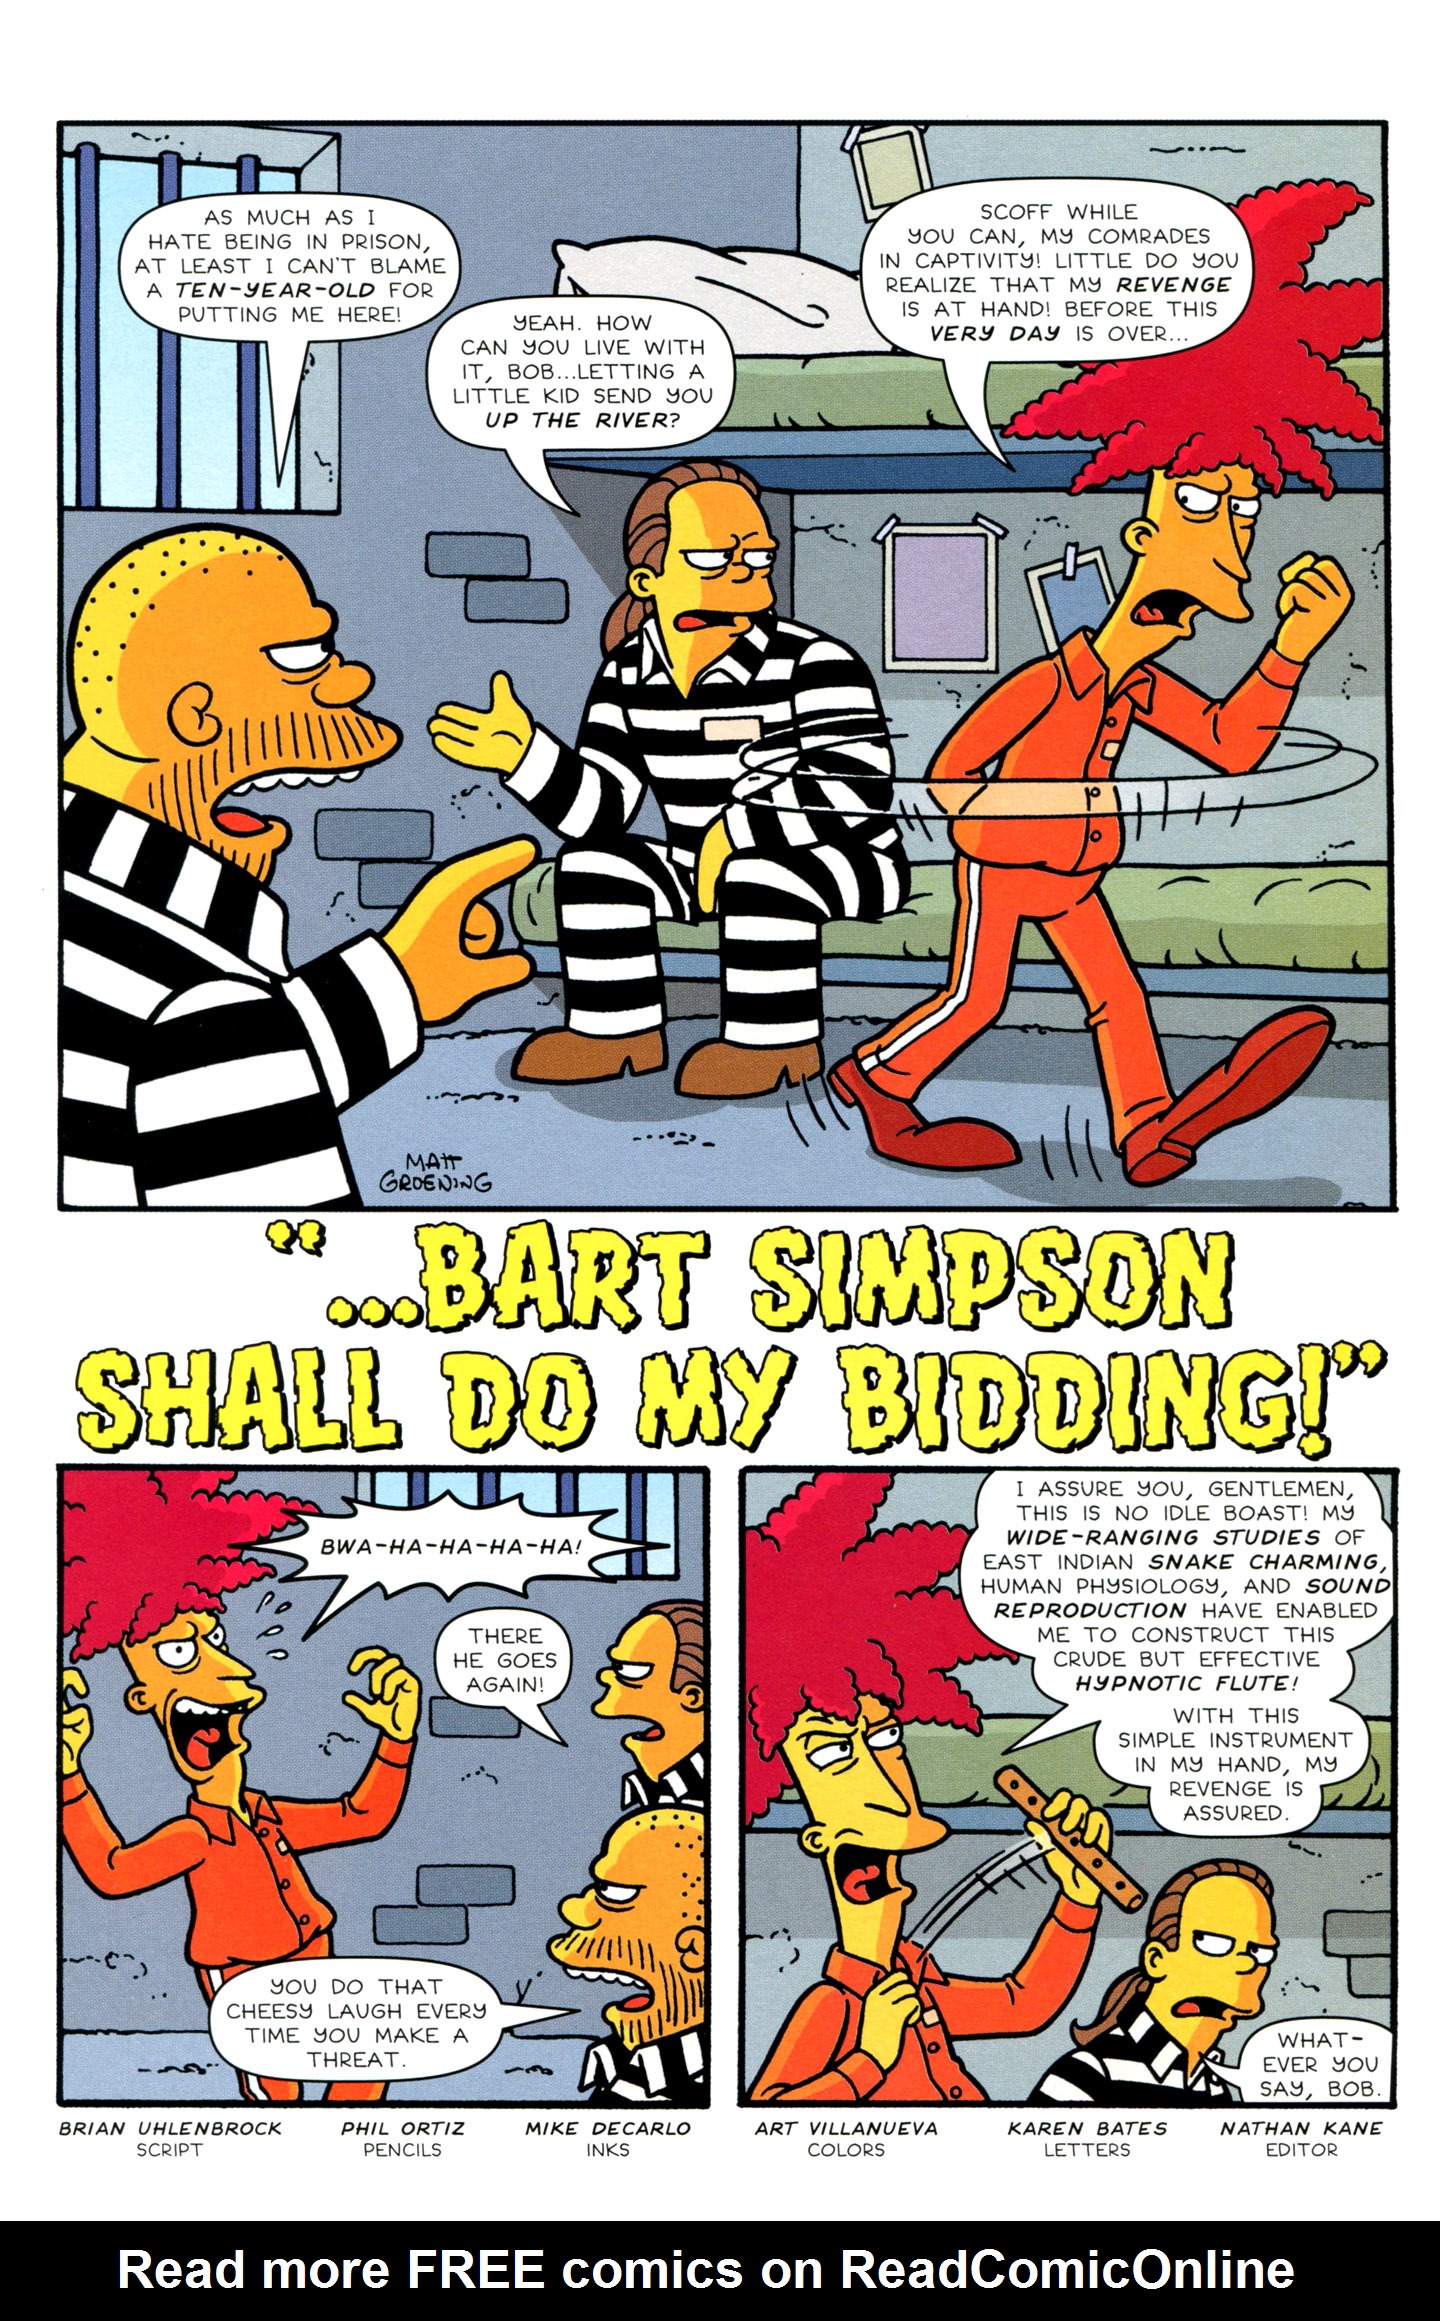 Read online Bart Simpson comic -  Issue #69 - 17